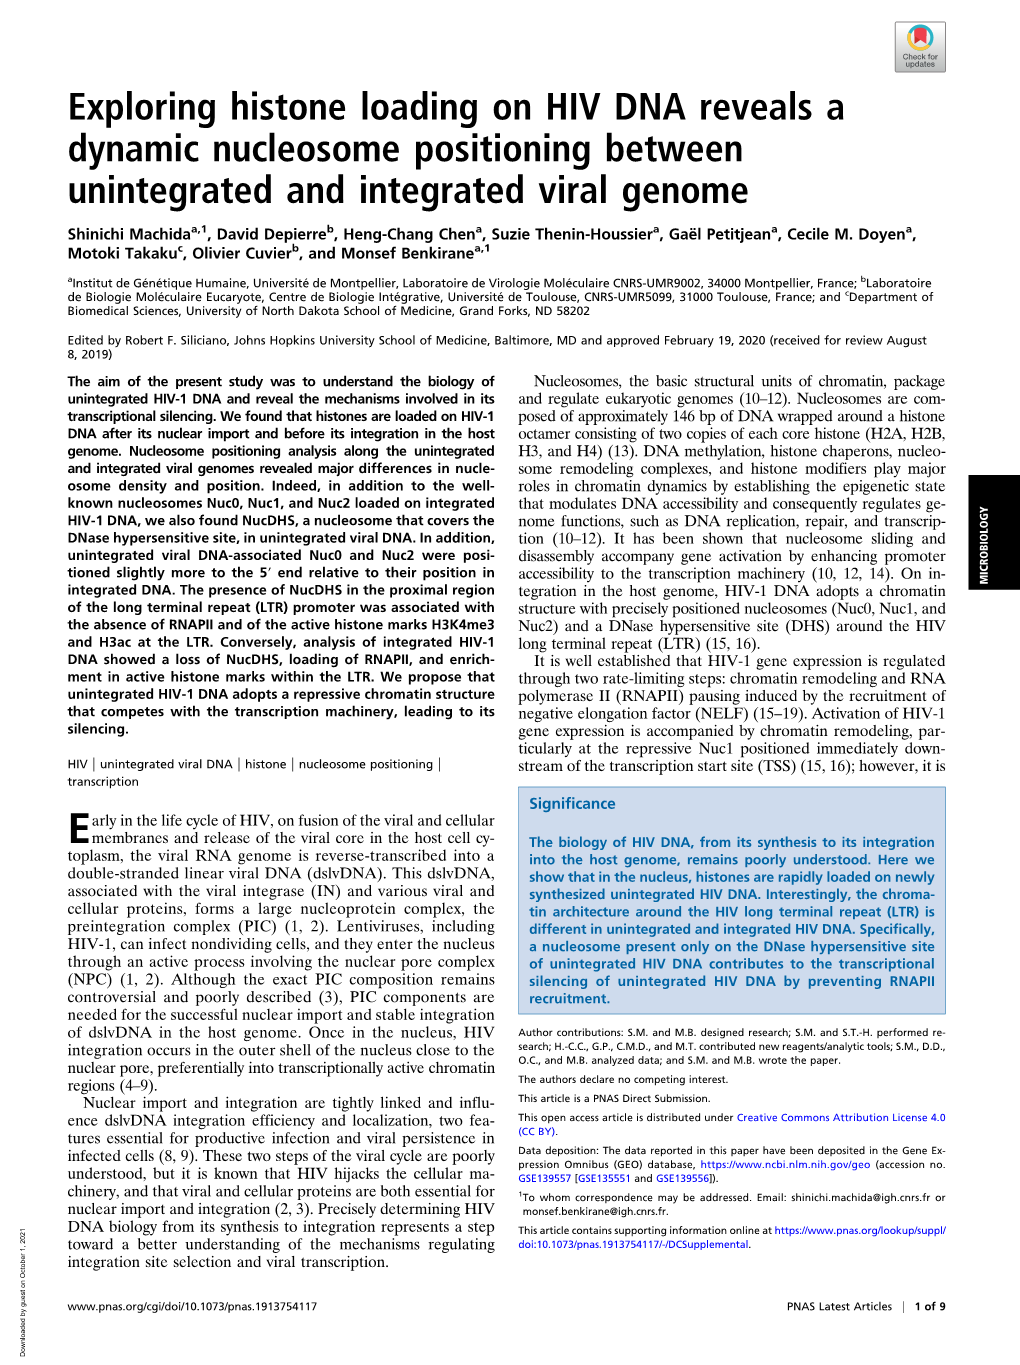 Exploring Histone Loading on HIV DNA Reveals a Dynamic Nucleosome Positioning Between Unintegrated and Integrated Viral Genome